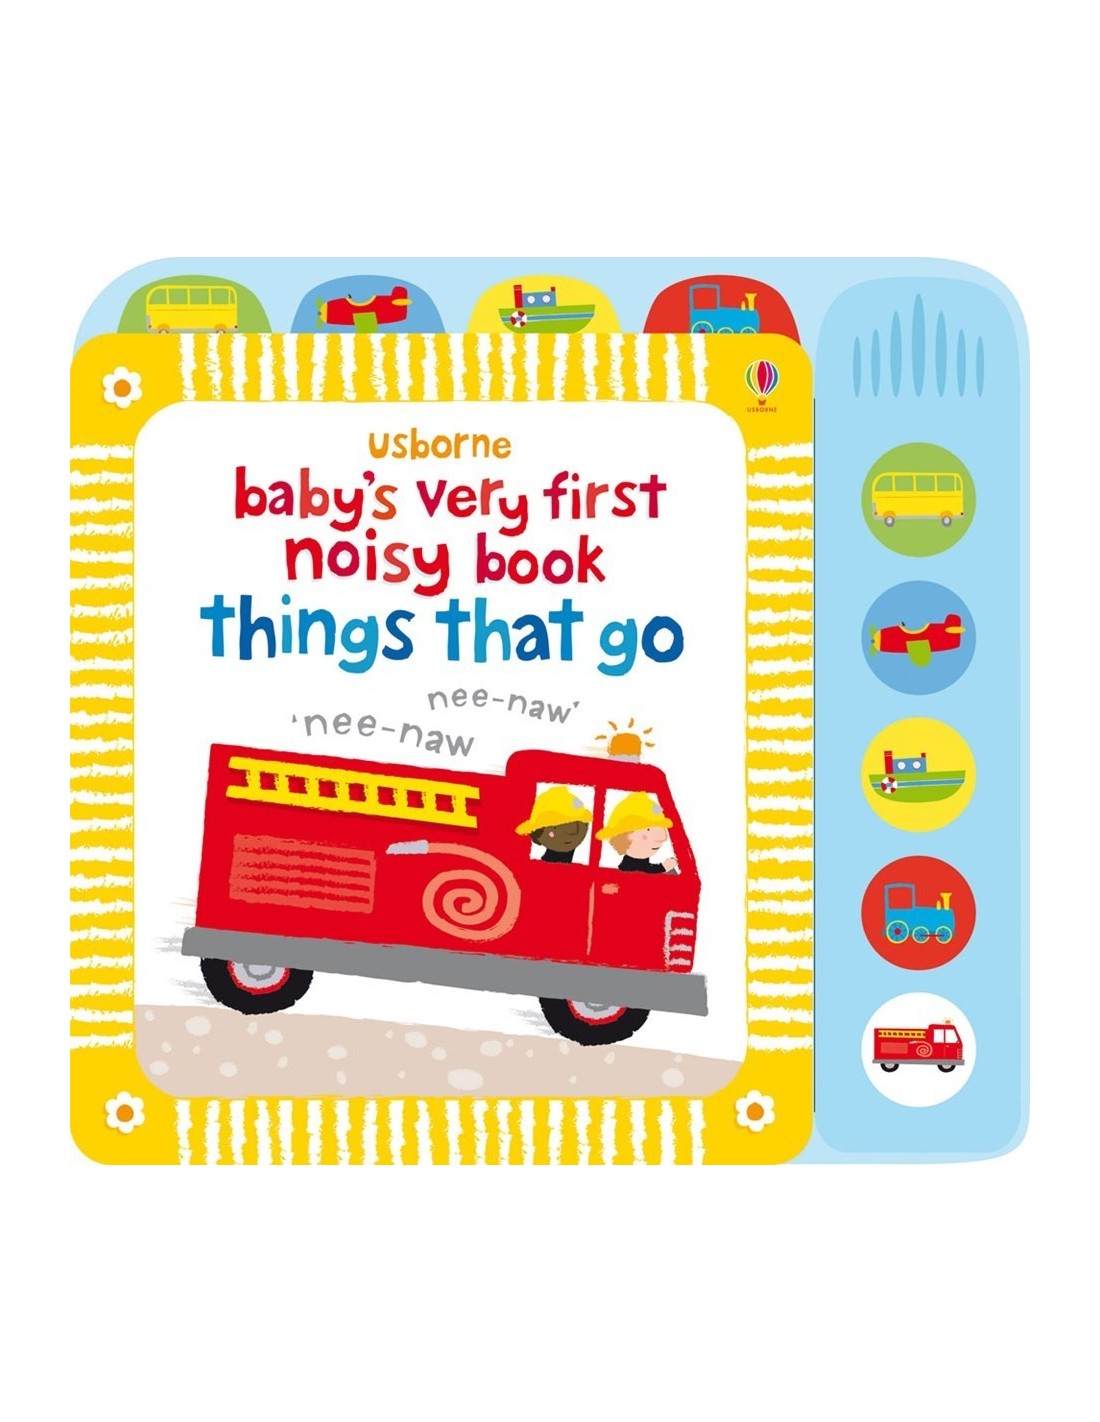 Baby's very first noisy book: Things that go